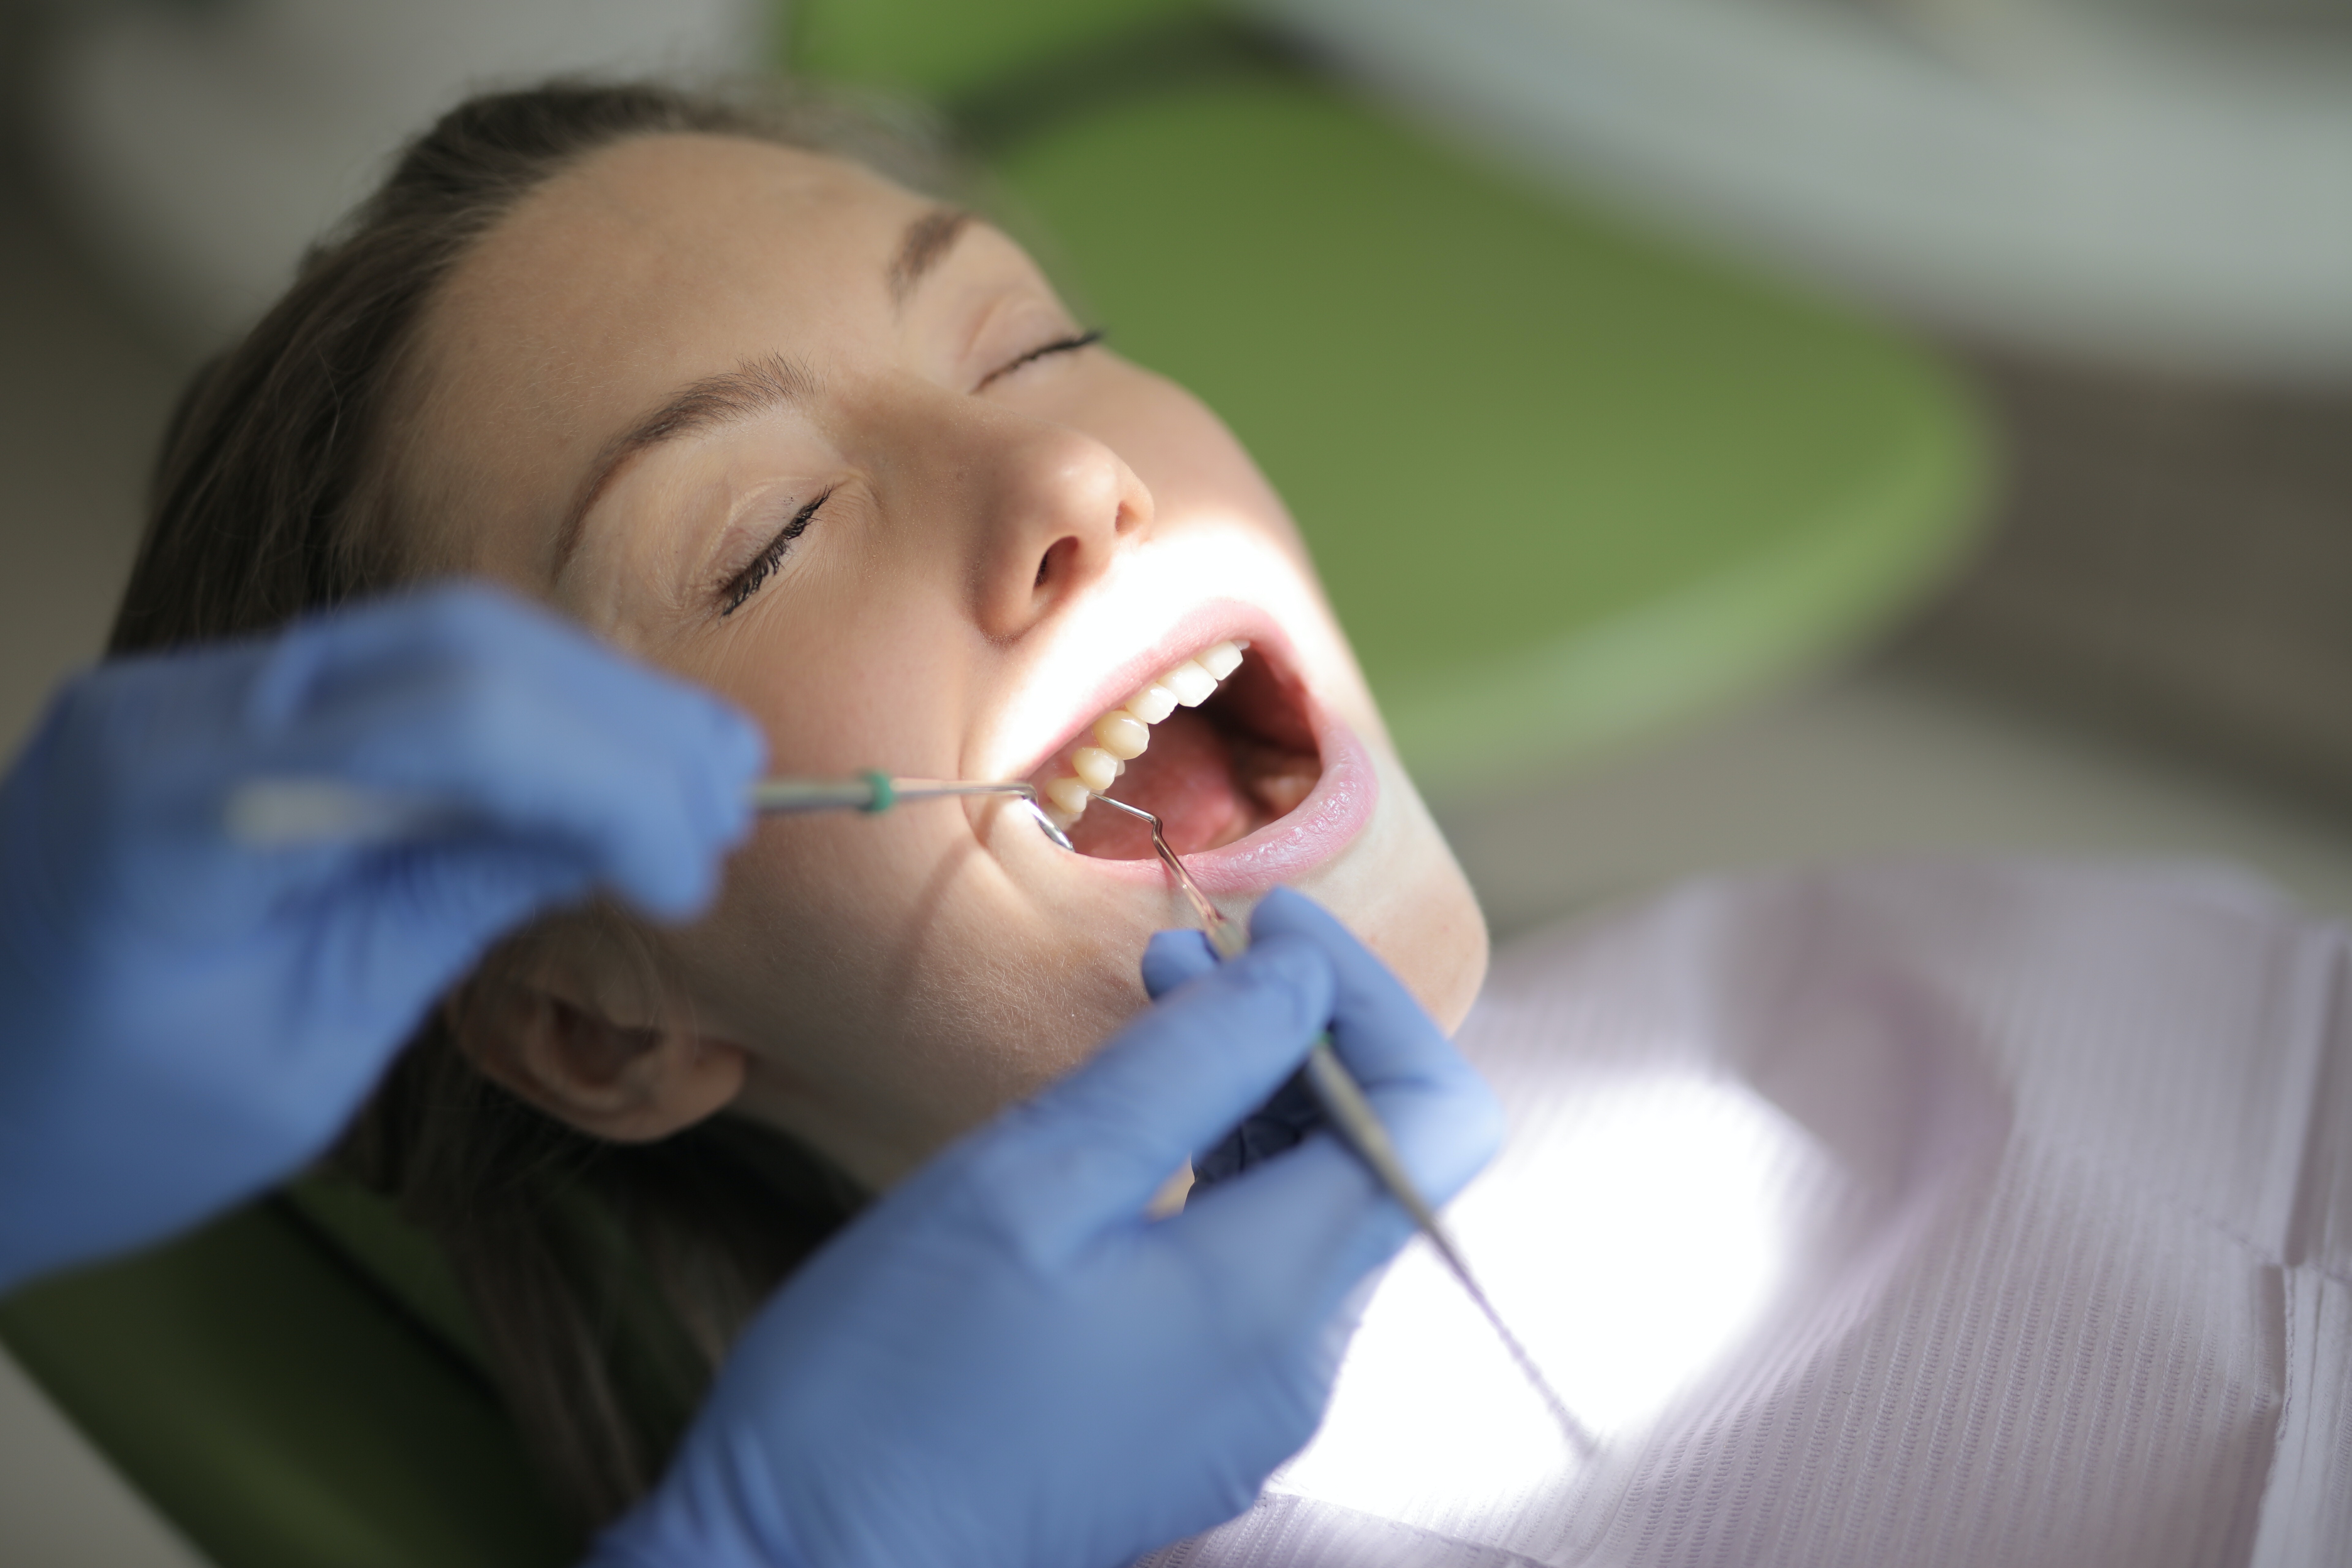 single sitting root canal treatment cost in bangalore, Root canal treatment, SINGLE SITTING ROOT CANAL TREATMENT COST, RCT TREATMENT COST IN Bangalore, RCT CHARGES, RCT COST, RCT PRICE IN BANGALORE.